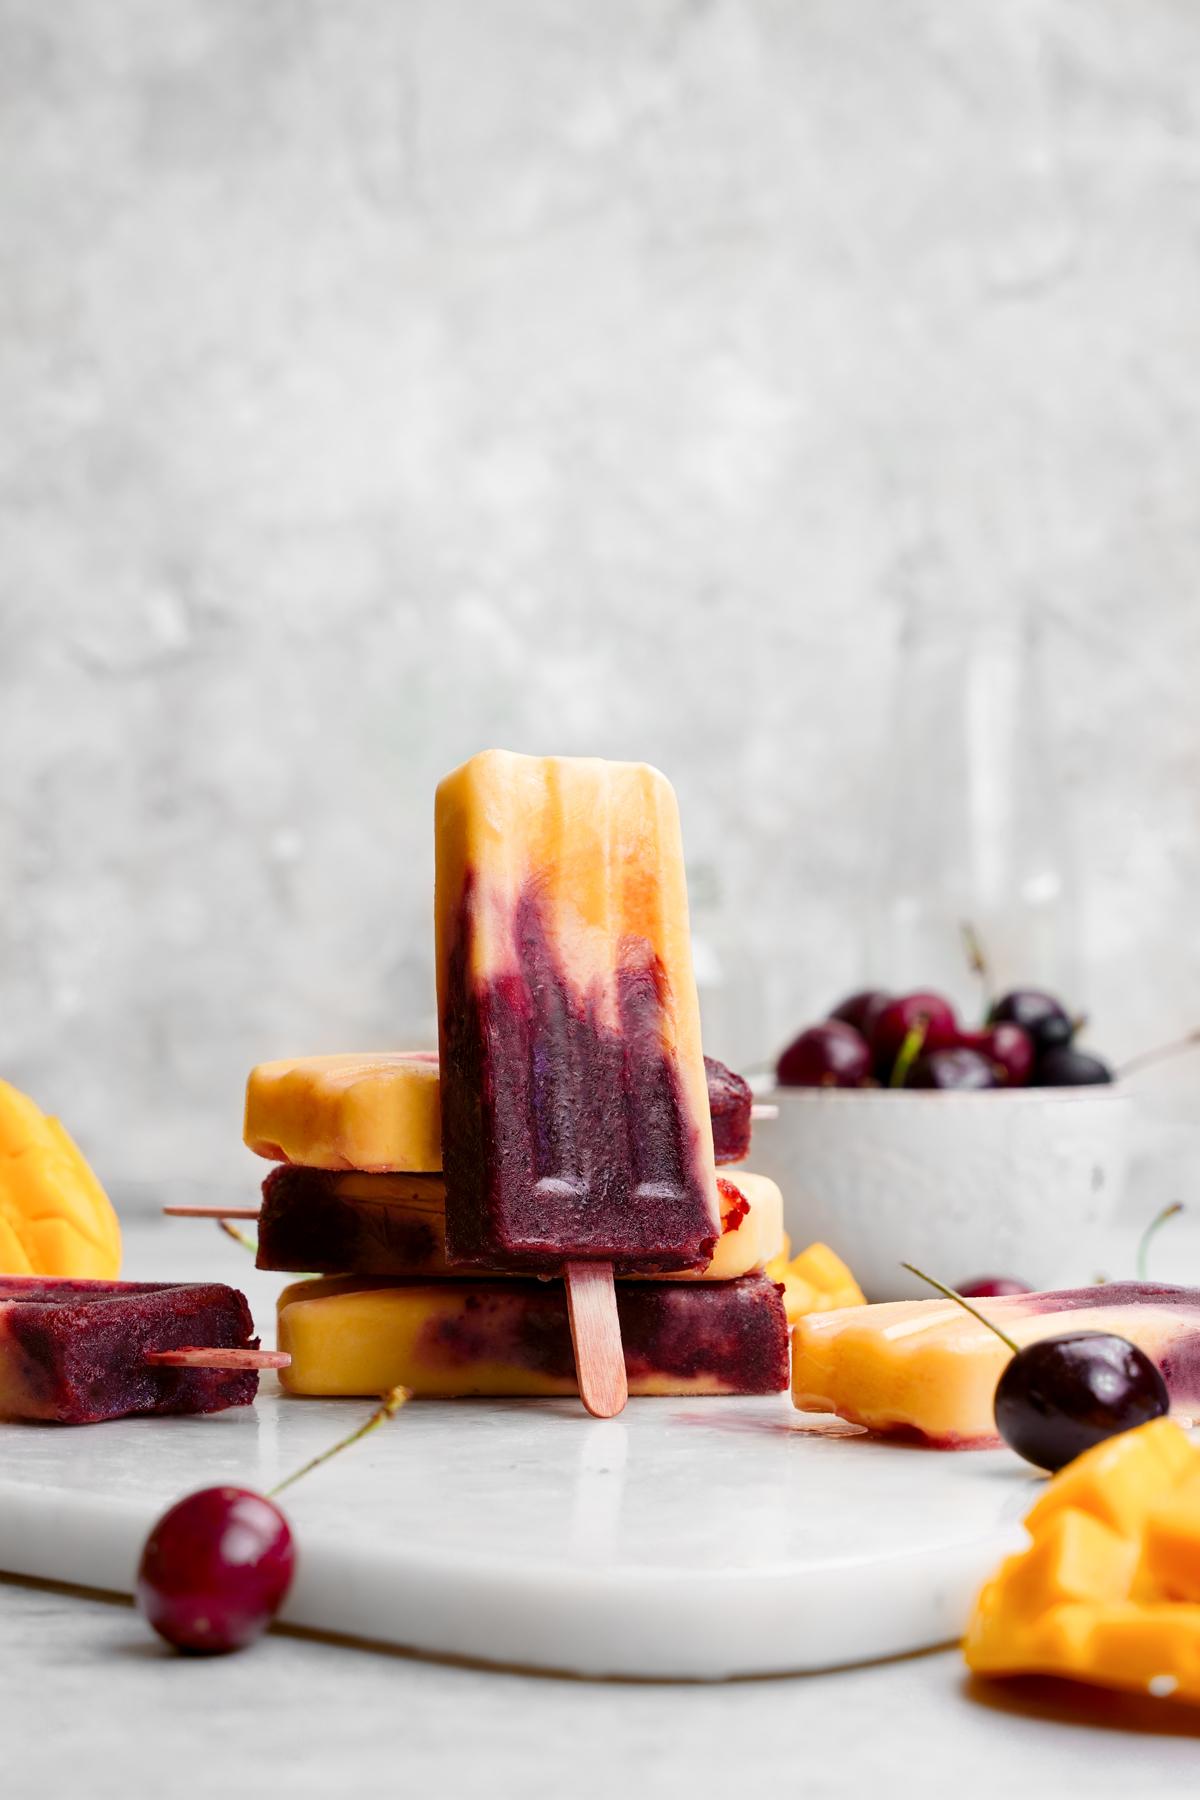 the cherry mango popsicles stacked on top of each other with one standing upright. The popsicles are surrounded by fresh ripe mango and cherries